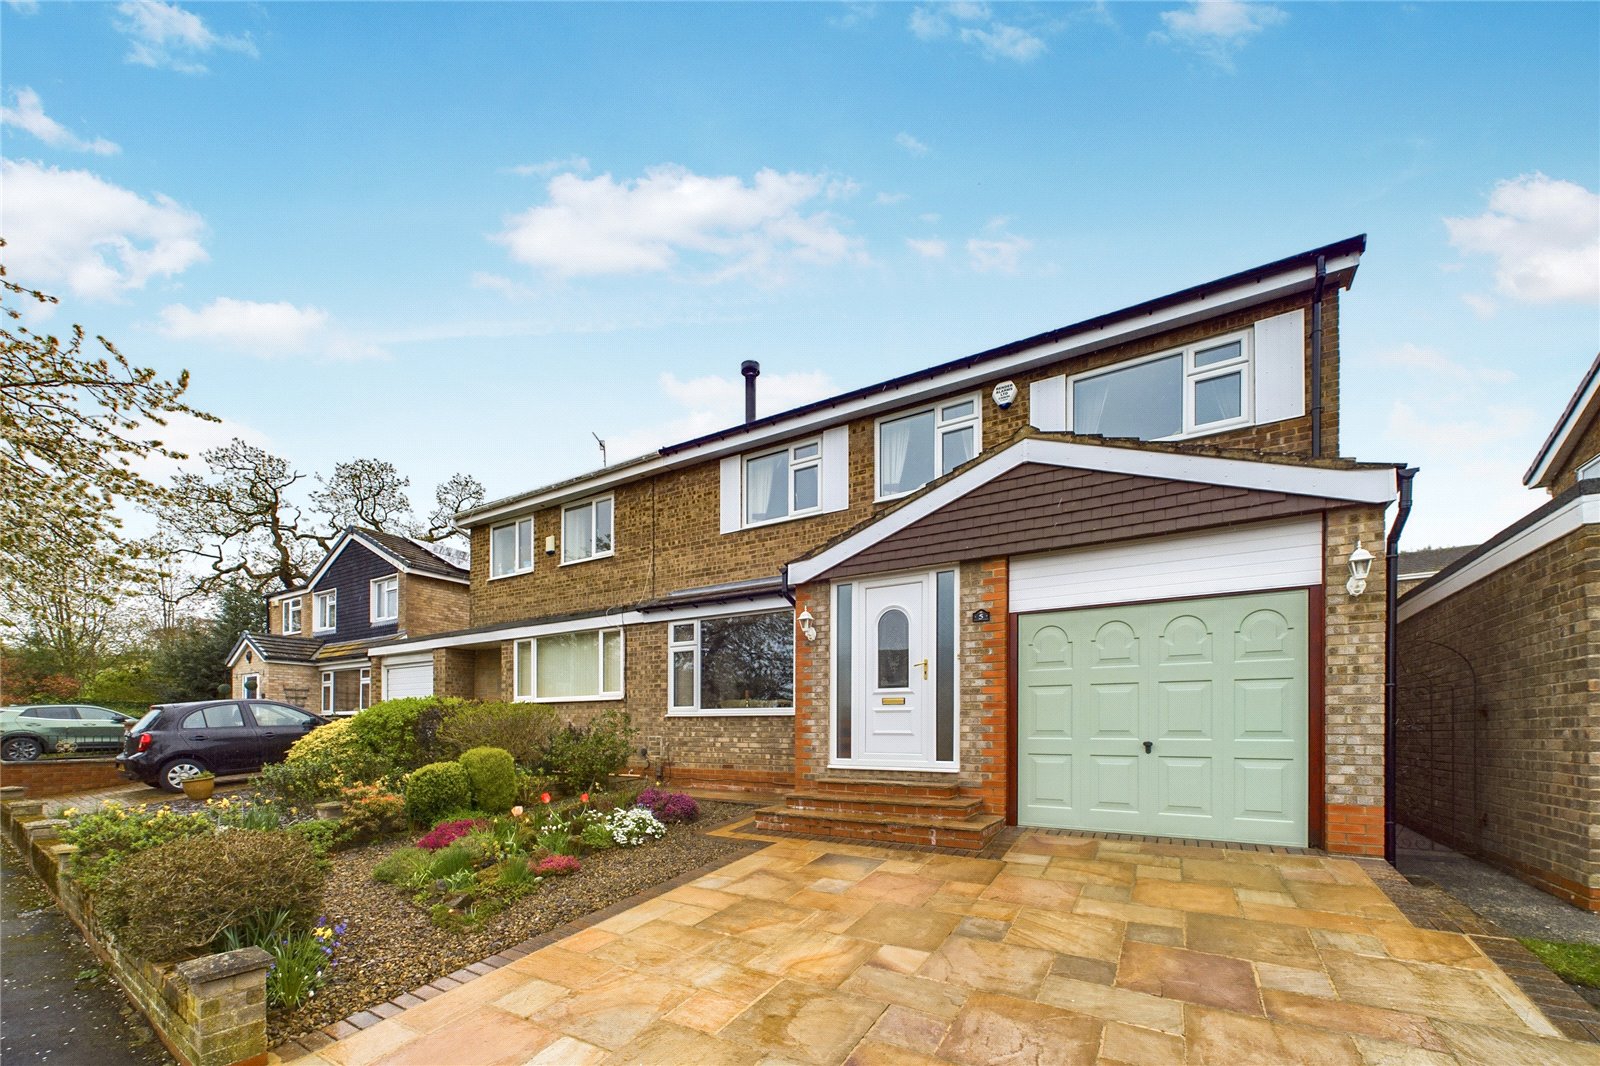 3 bed house for sale in Enfield Chase, Guisborough  - Property Image 1